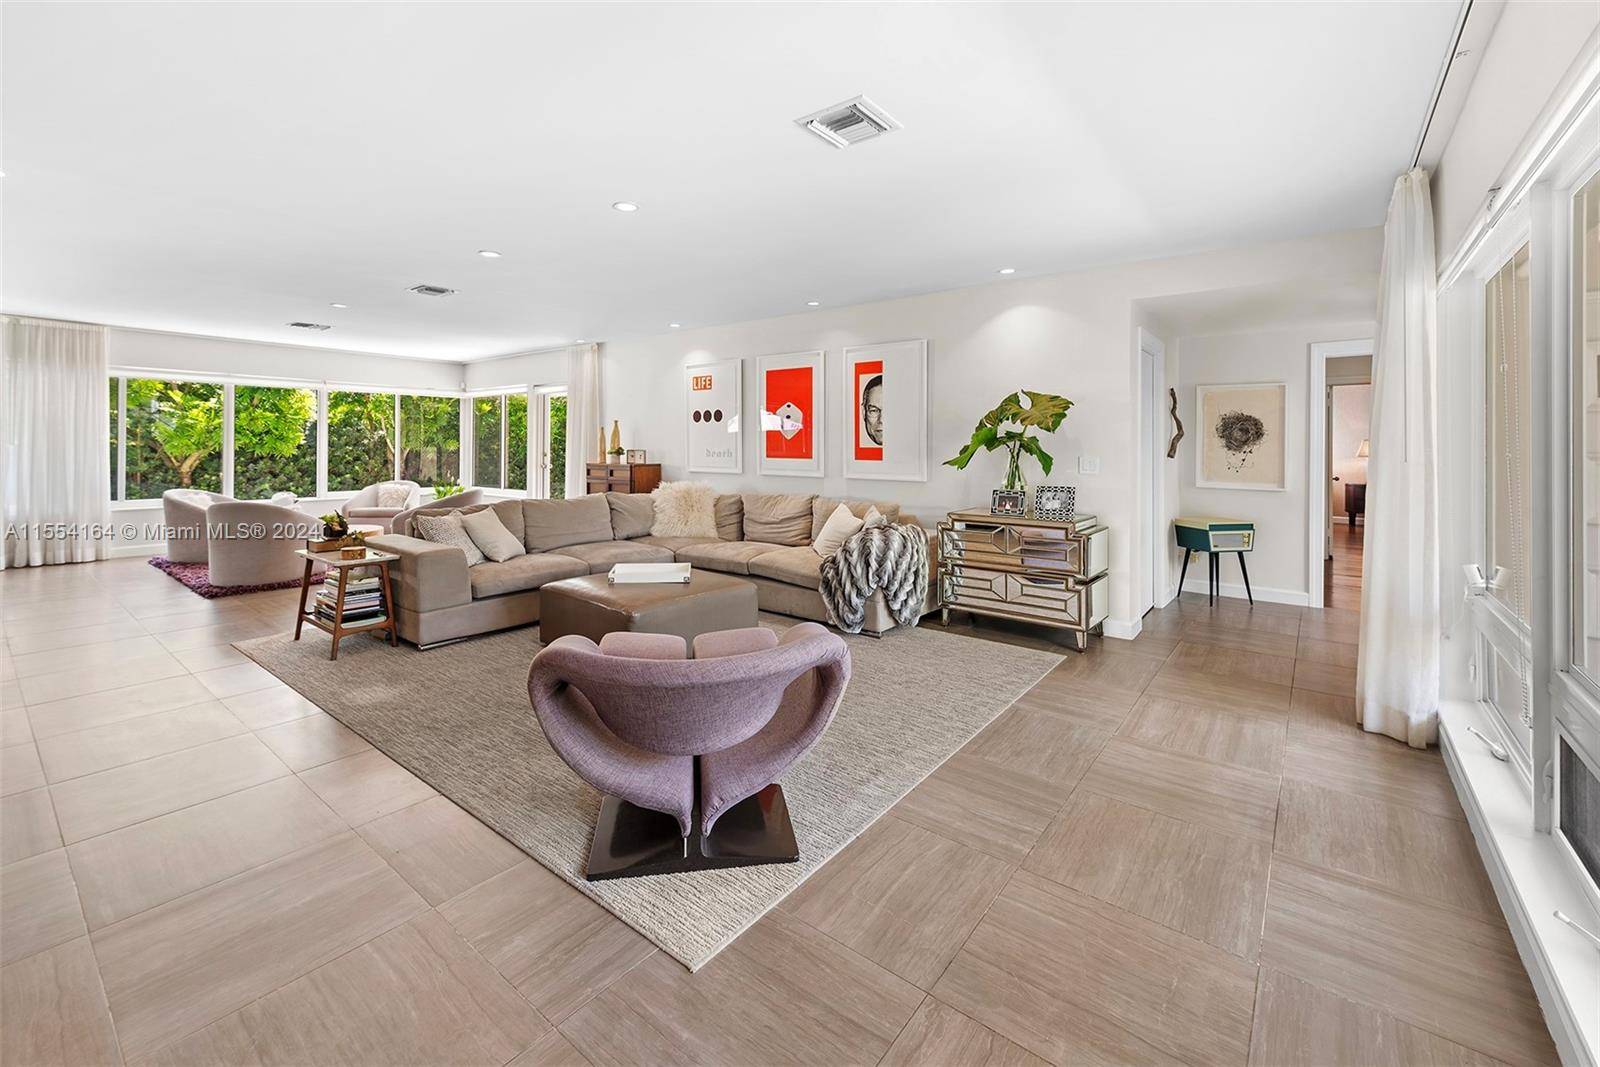 Welcome to this spacious 5 bed, 3 bath home in Miami Beach, where indoor and outdoor living spaces harmonize beautifully.